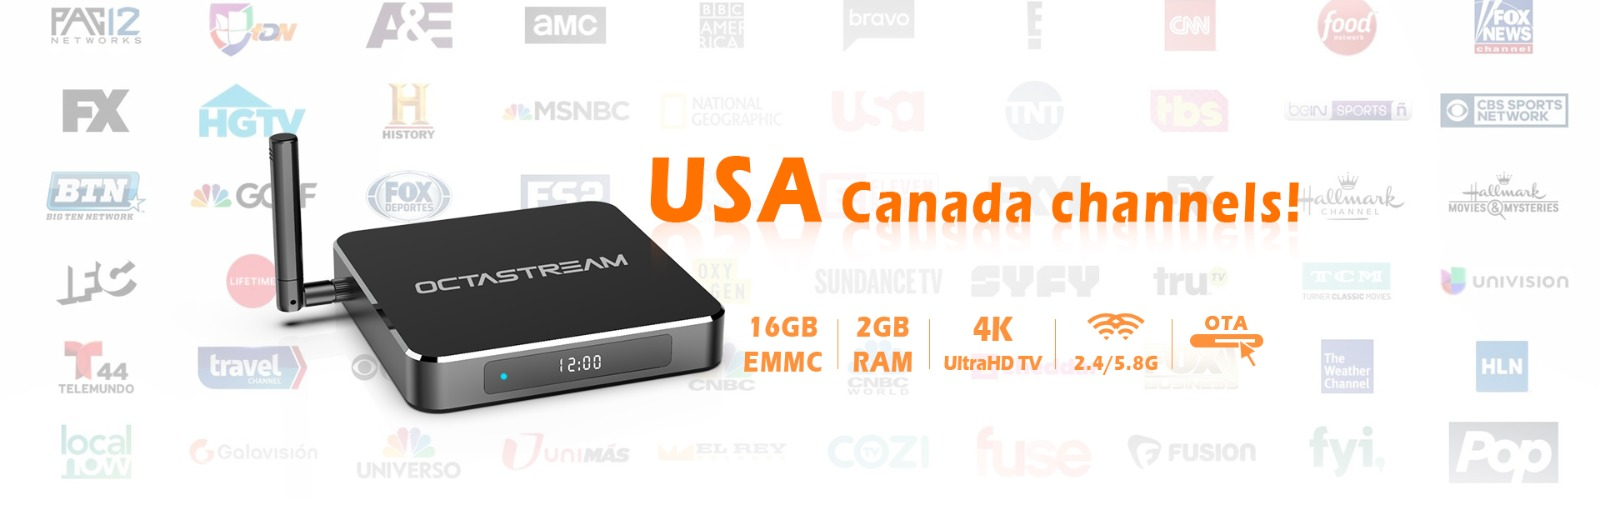 The octastream lifetime iptv Q1 pro android tv box without monthly fee